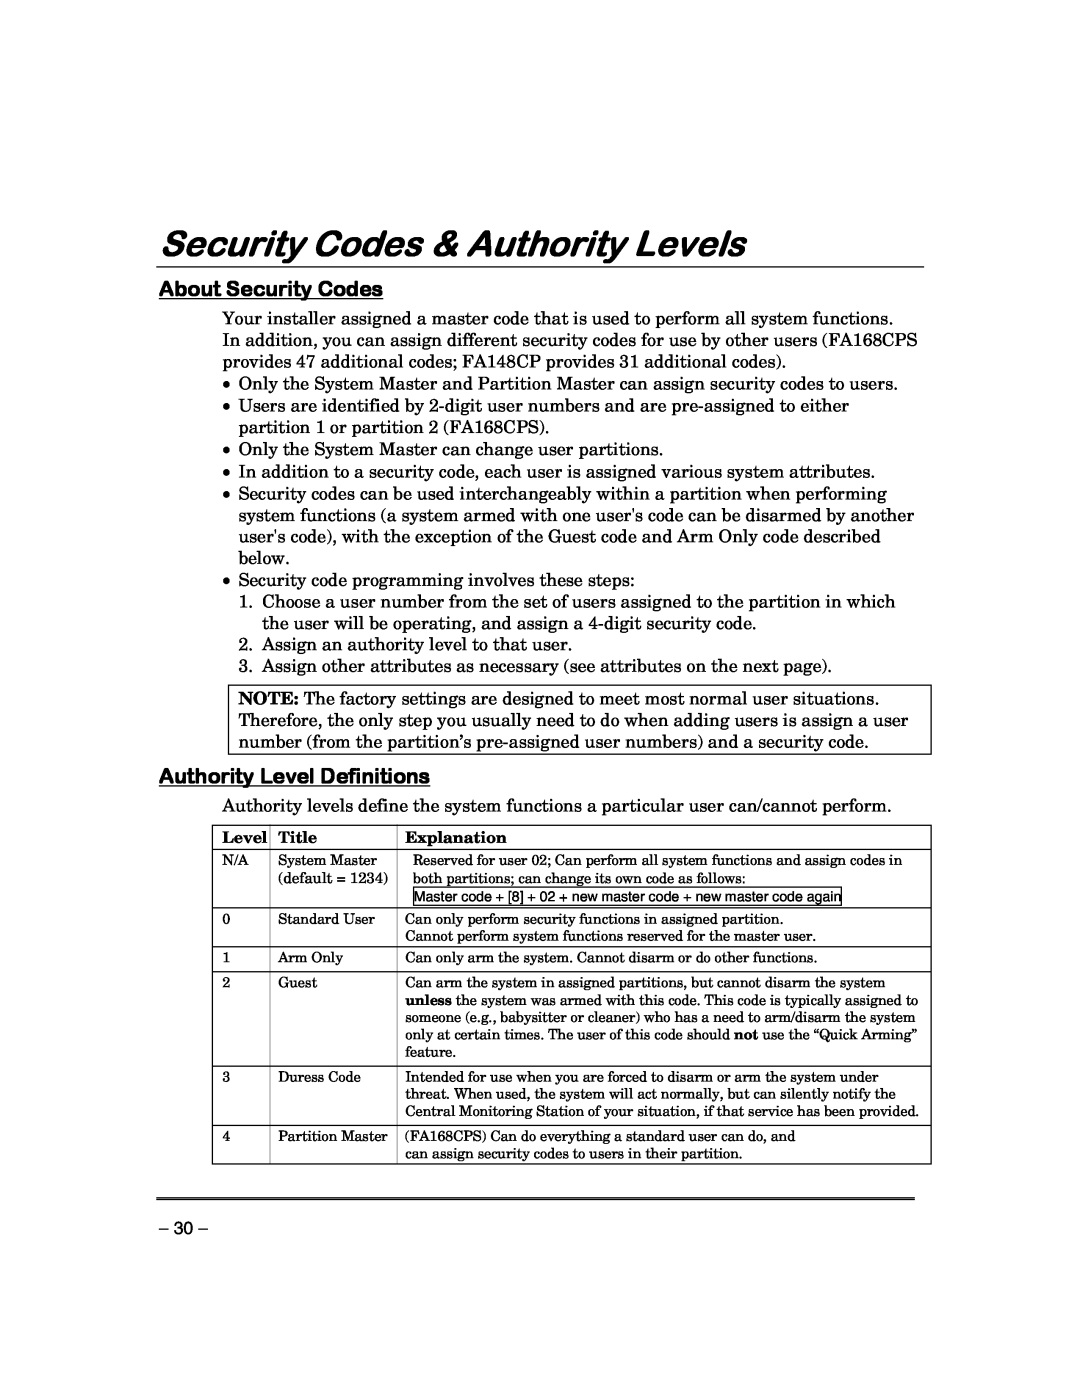 First Alert FA148CPSIA, FA168CPSSIA Security Codes & Authority Levels, About Security Codes, Authority Level Definitions 